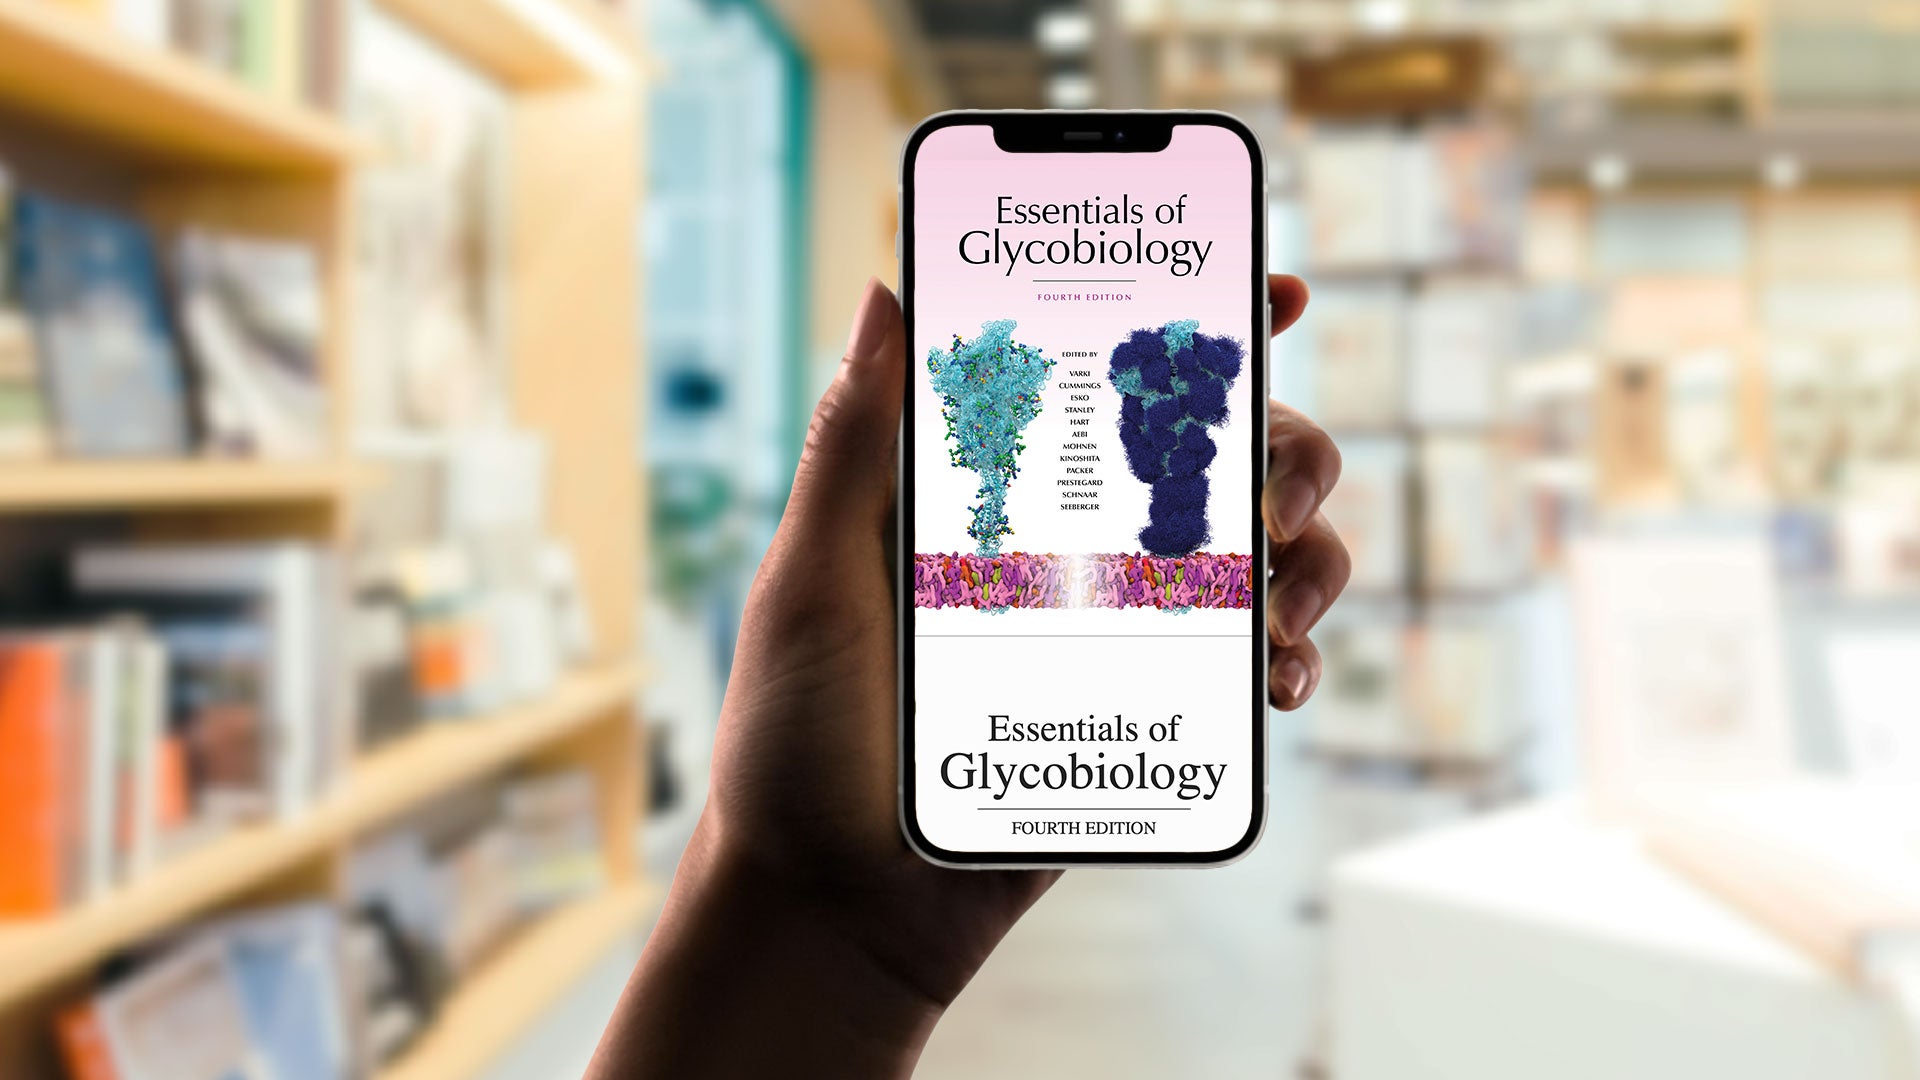 image of the Essentials of Glycobiology ebook display in an iPhone